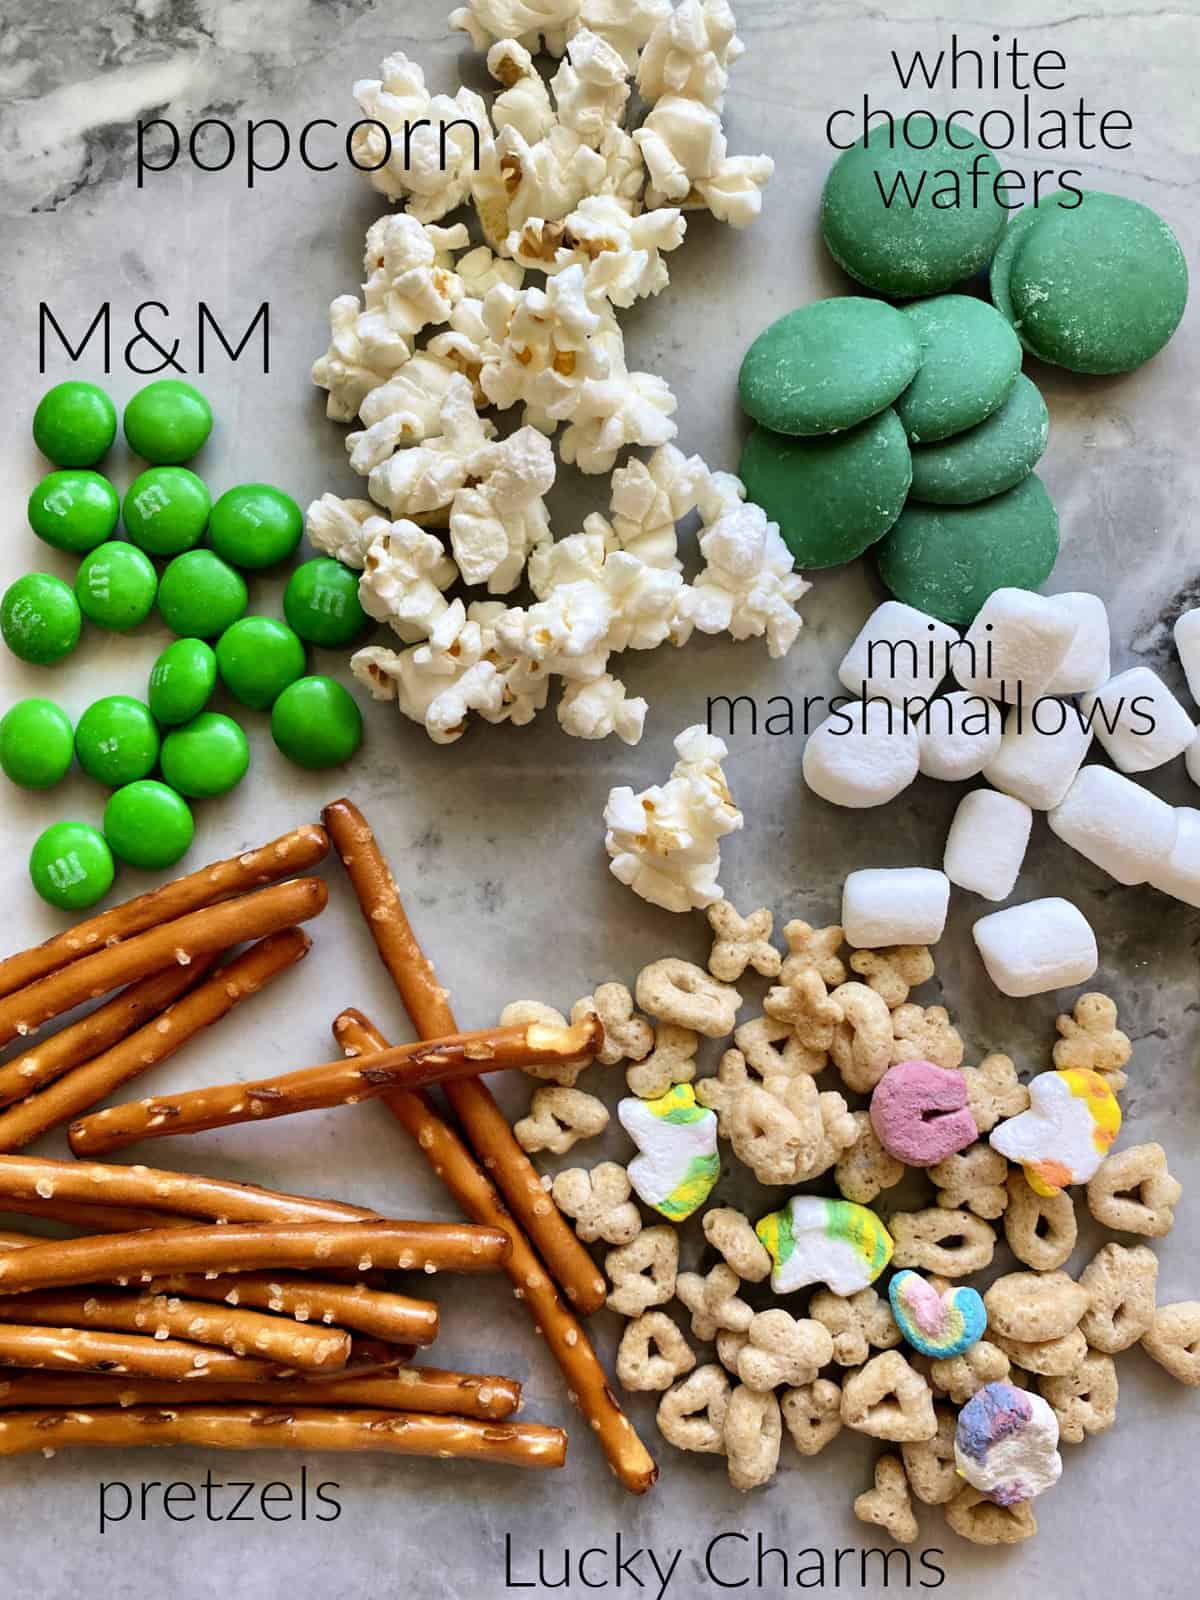 Ingredients: popcorn, M&M, pretzels, lucky charms, white chocolate wafers, and mini marshmallows.